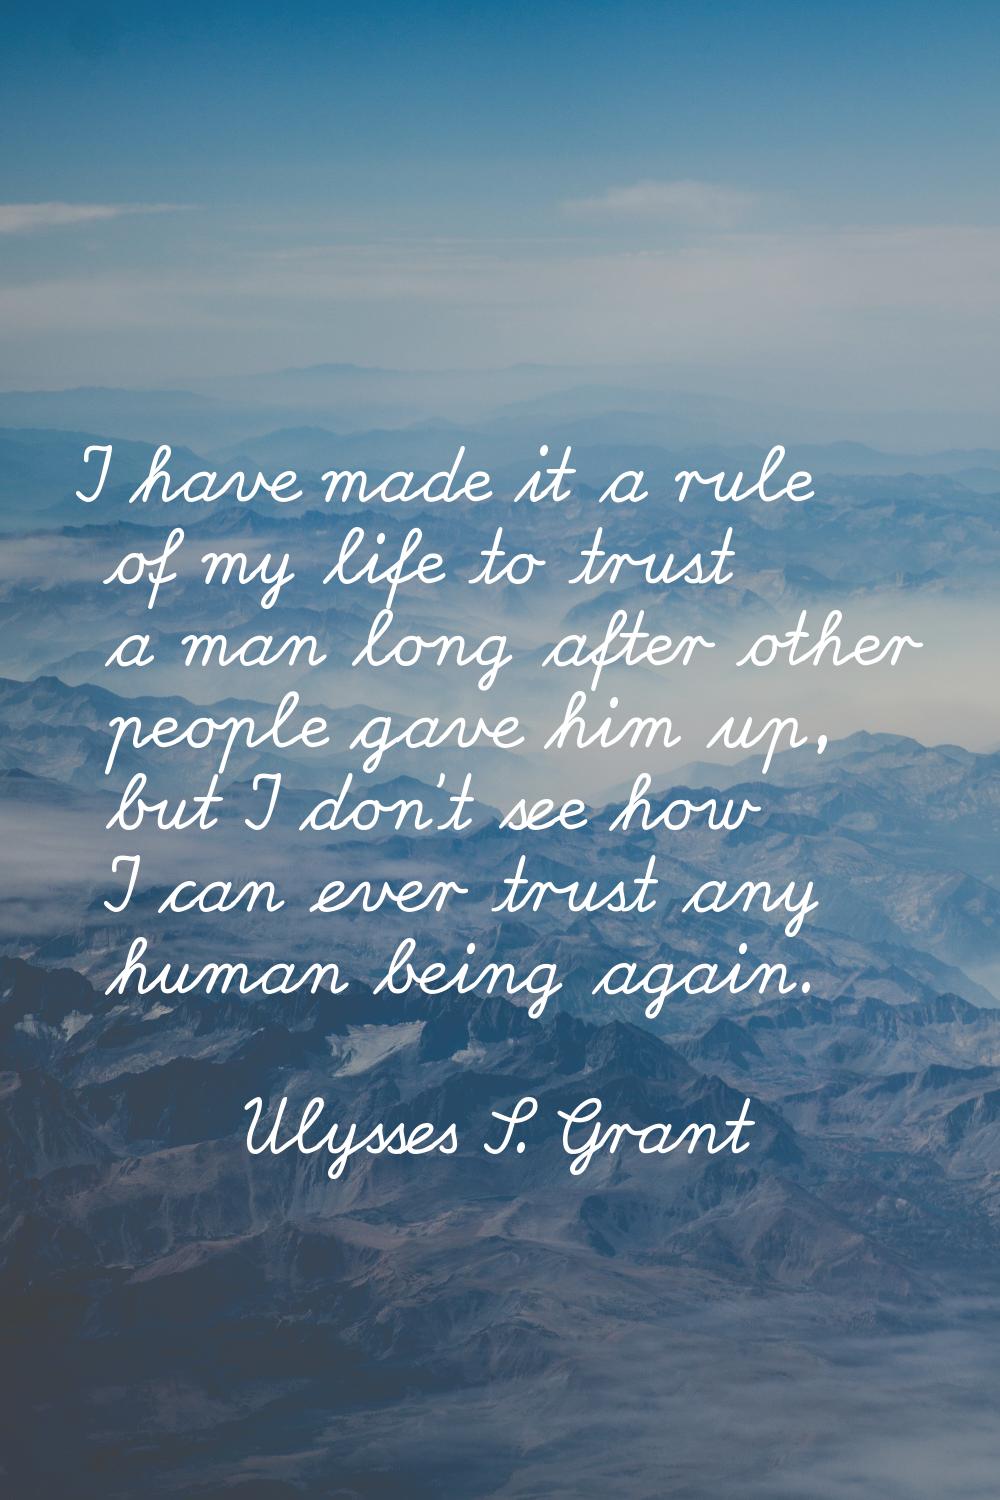 I have made it a rule of my life to trust a man long after other people gave him up, but I don't se